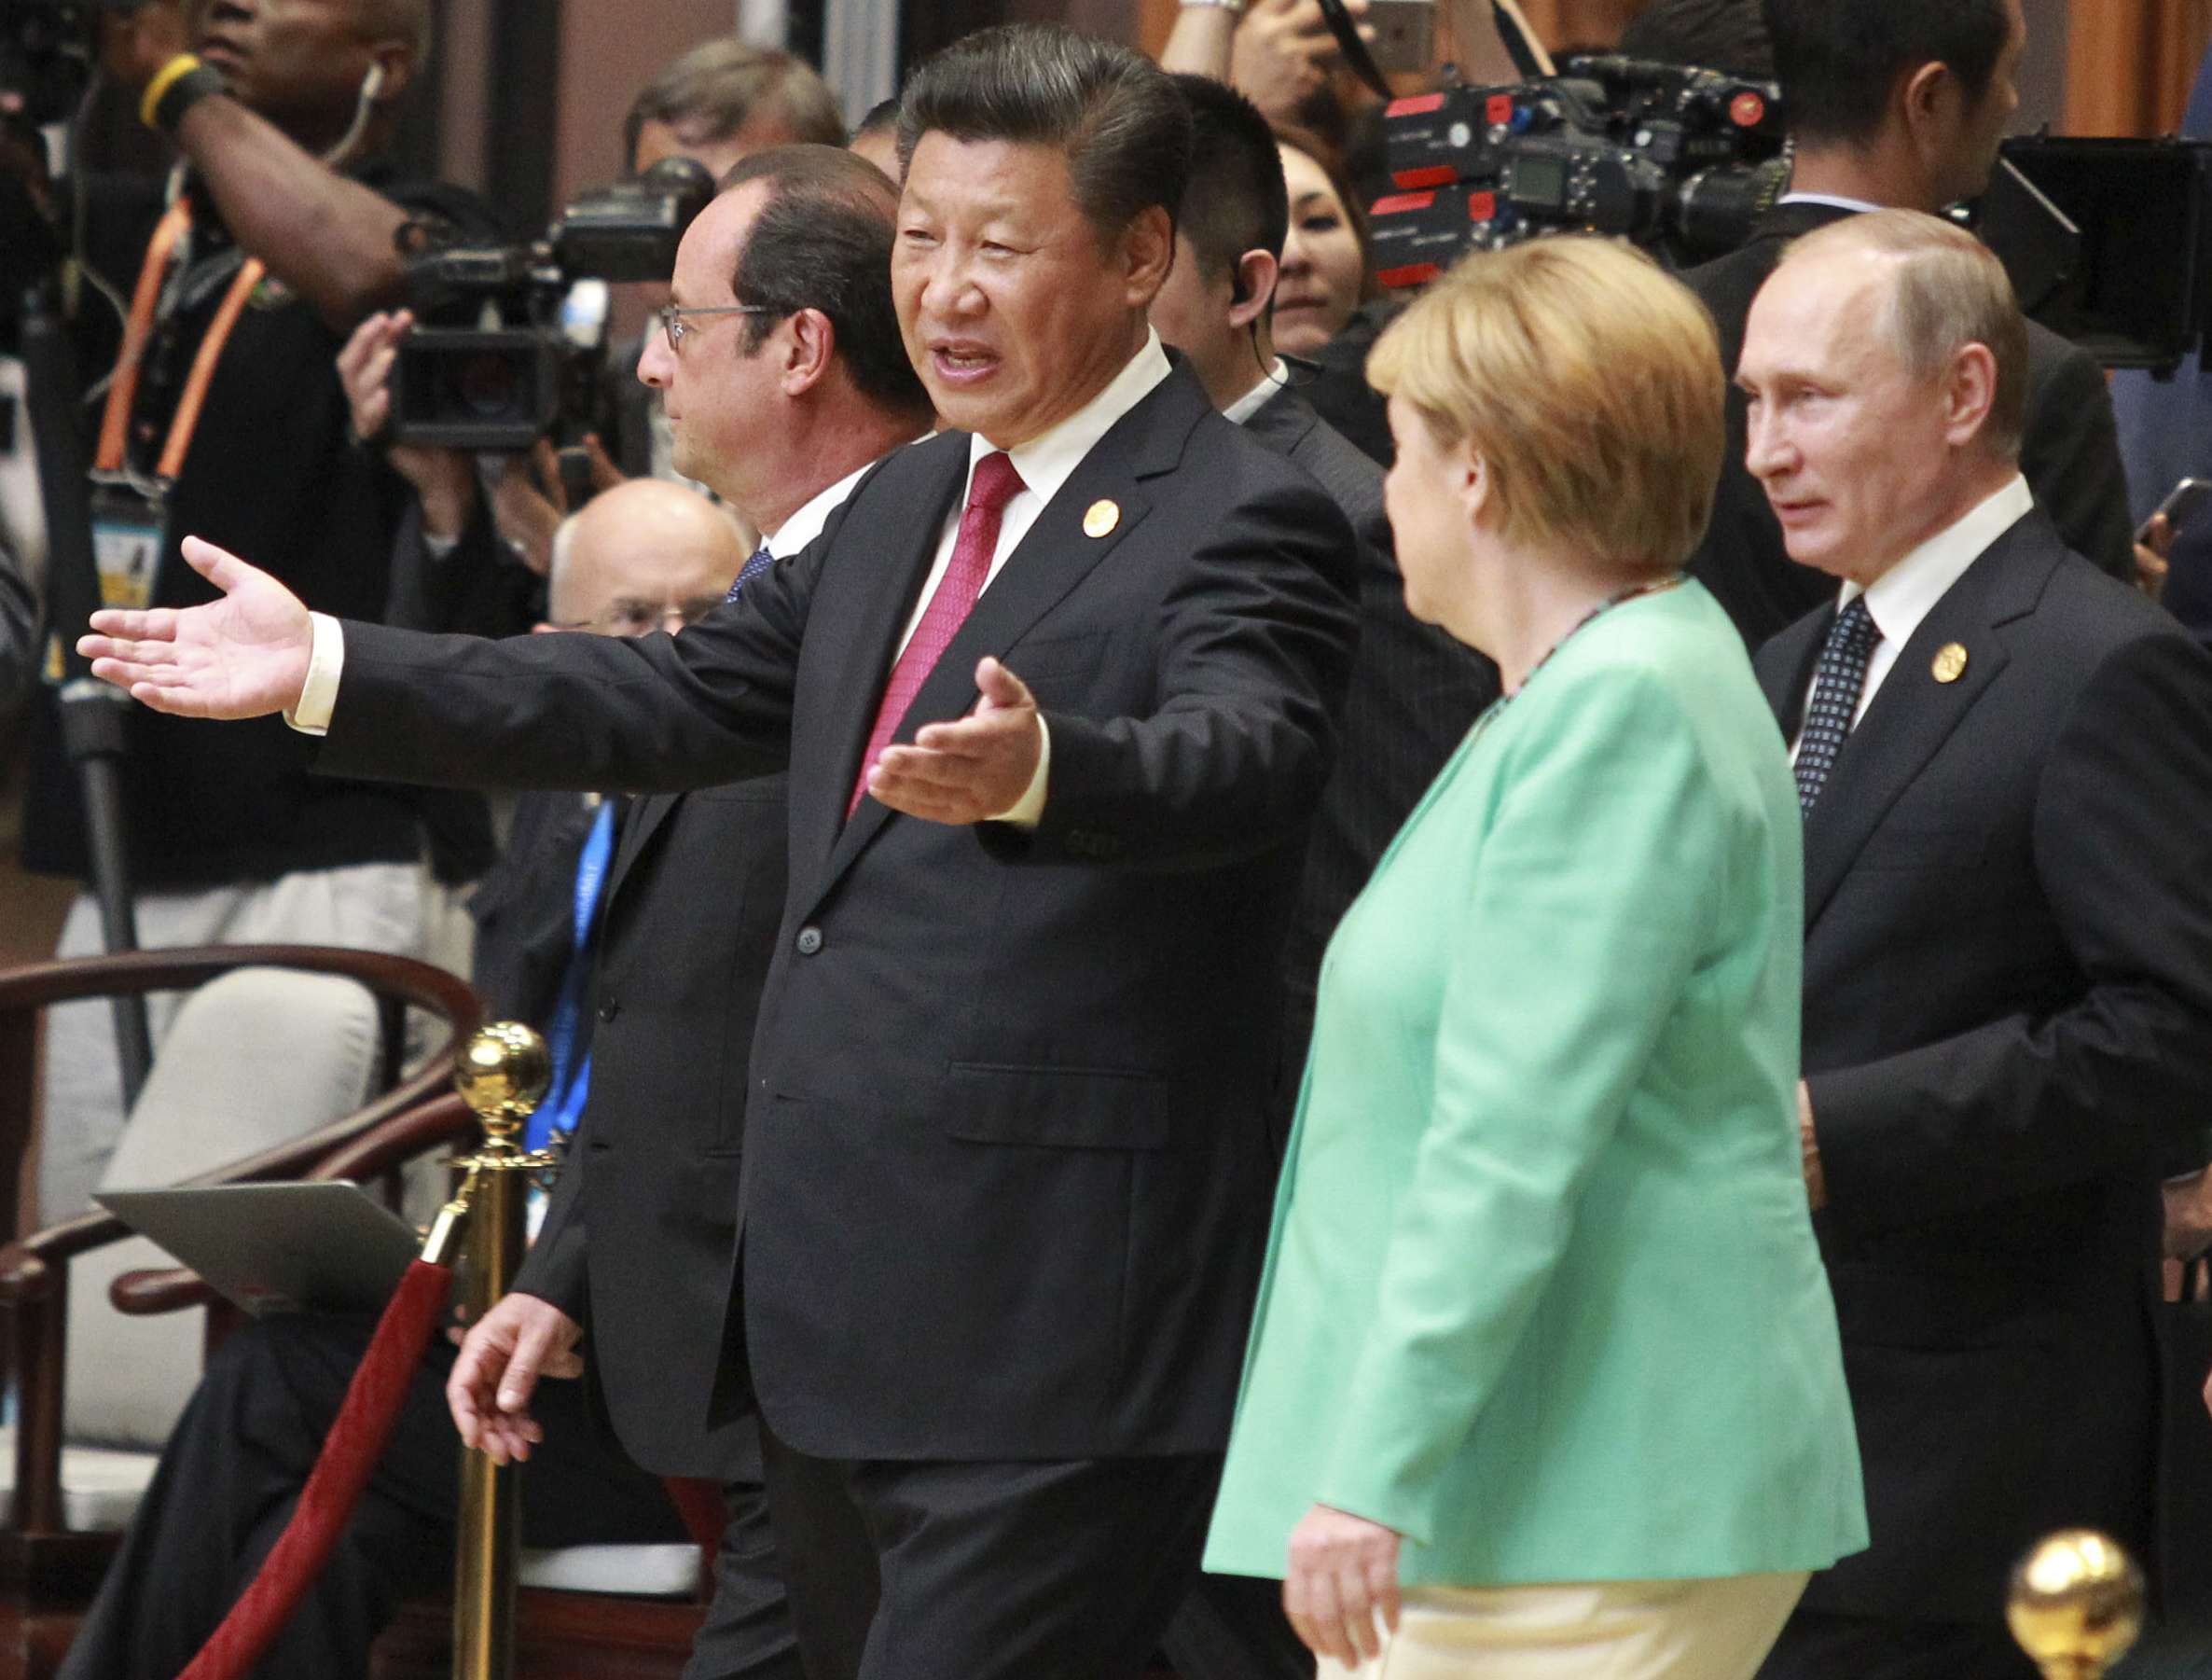 President Xi Jinping and German Chancellor Angela Merkel, French President Francois Hollande, and Russia President Vladimir Putin walk into the main G20 hall in Hangzhou on Sunday. Photo: Simon Song